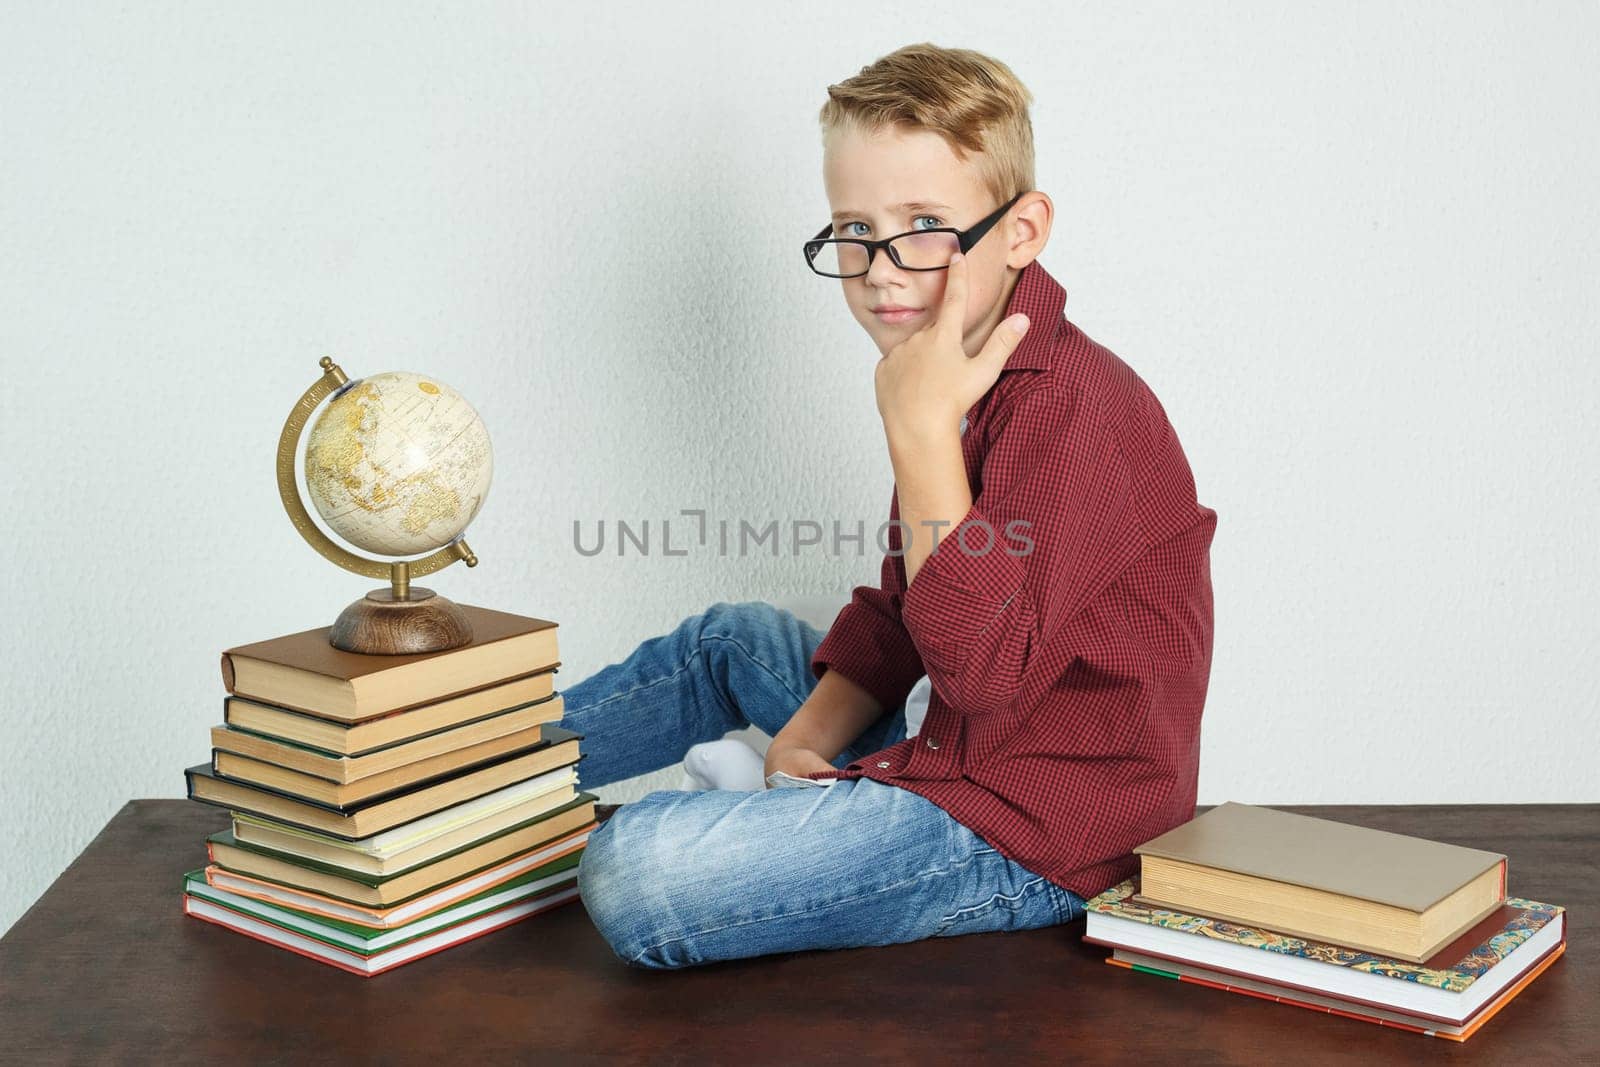 A schoolboy sits on a table near books and a globe, straightens his glasses. Education concept